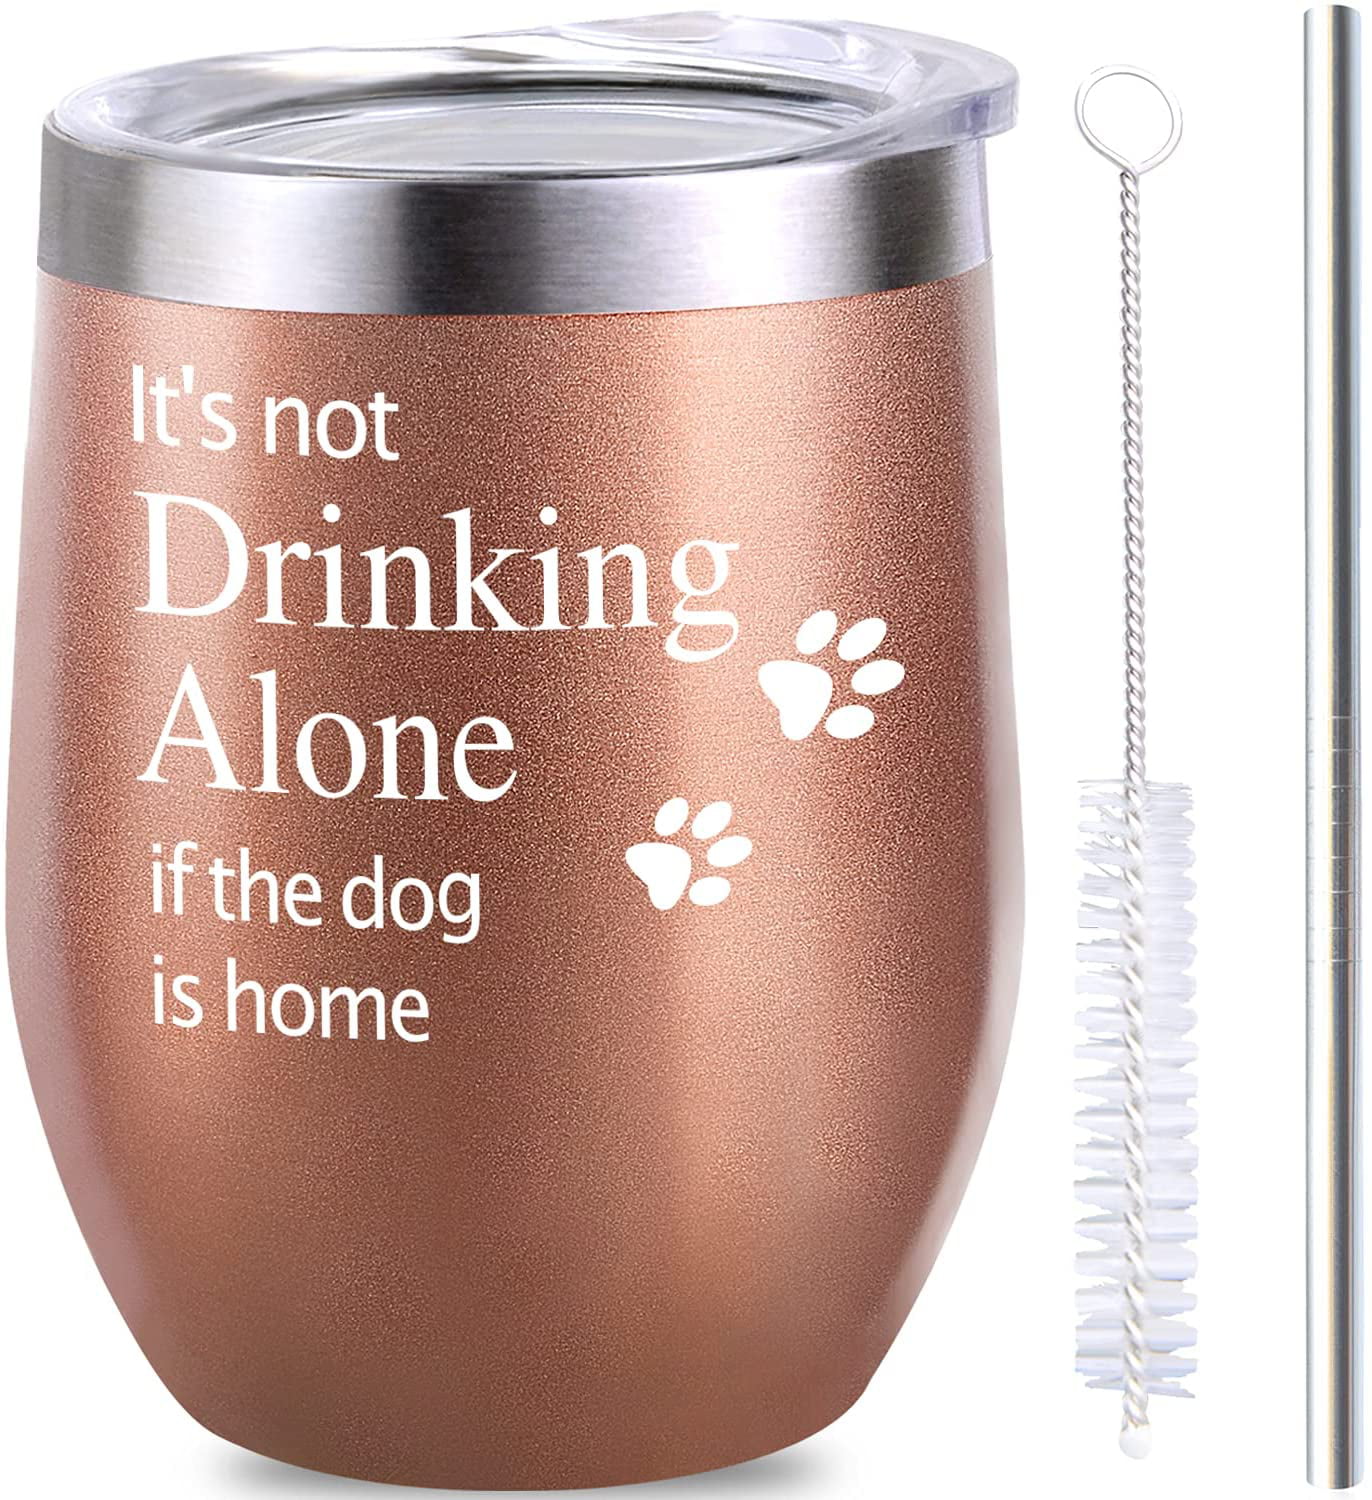 12 OZ Stemless Tumbler glass With Lid and brush It's not Drinking Alone if the dog is home drinking straw Funny Tumbler Glass Gift For Dog Lover Women Men Her Him Mom Dad Birthday Teacher